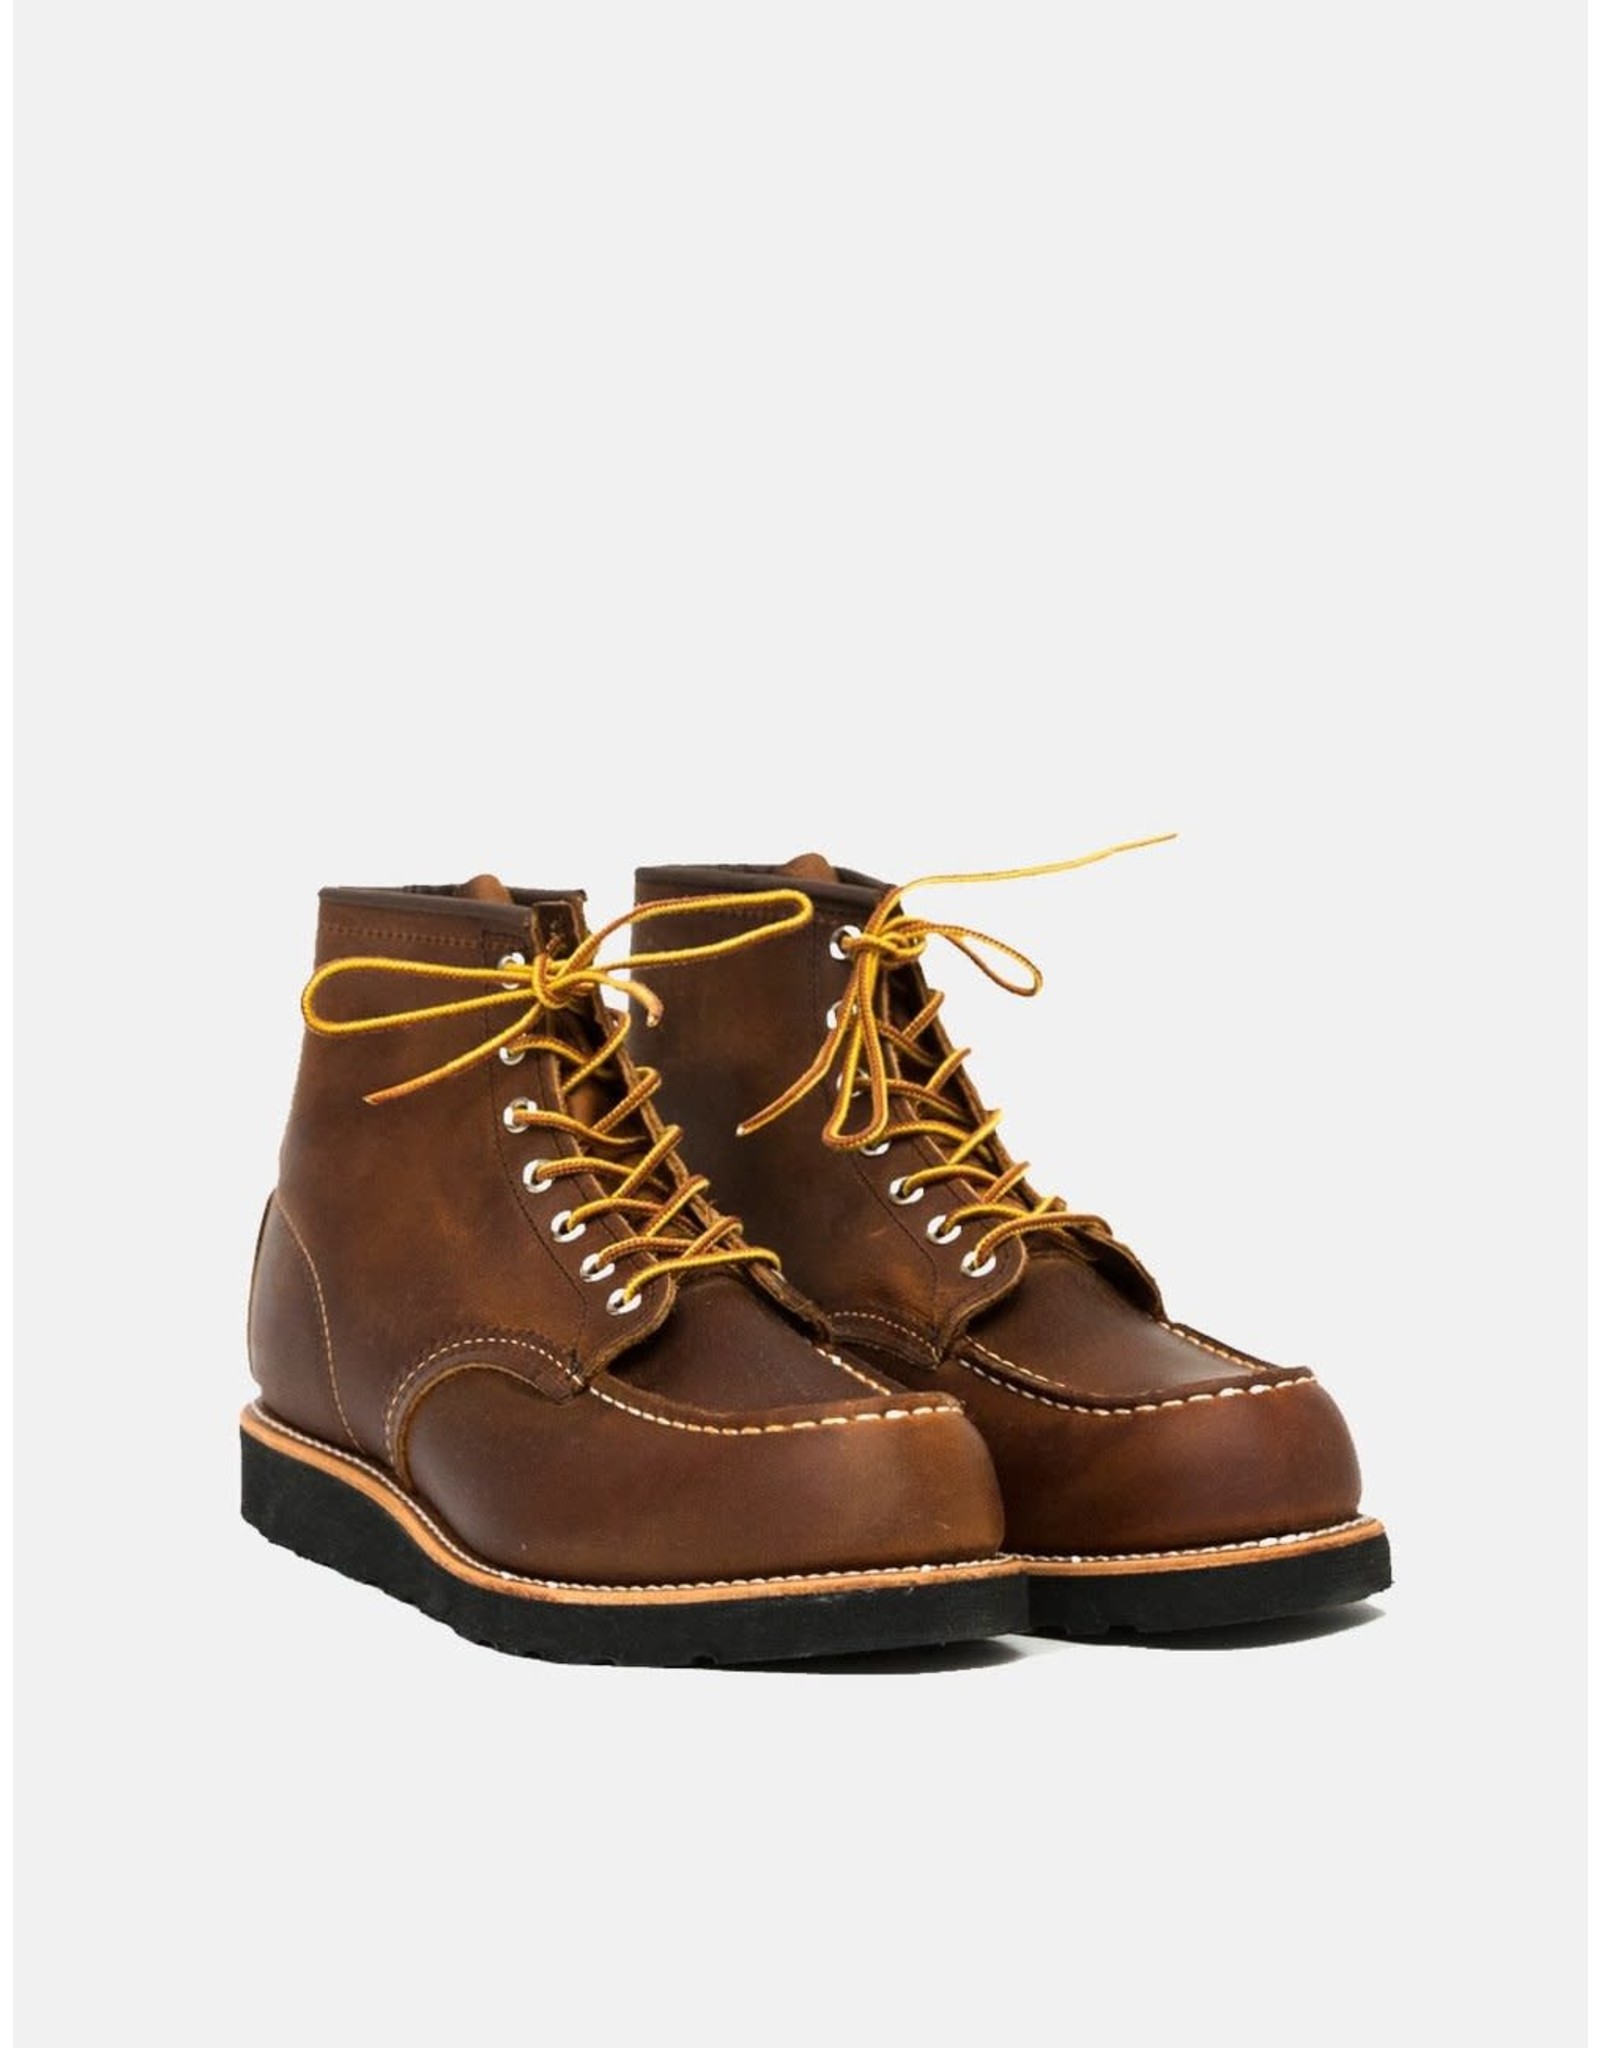 Red Wing Shoes Red Wing Shoes  8886 Heritage Moc Toe